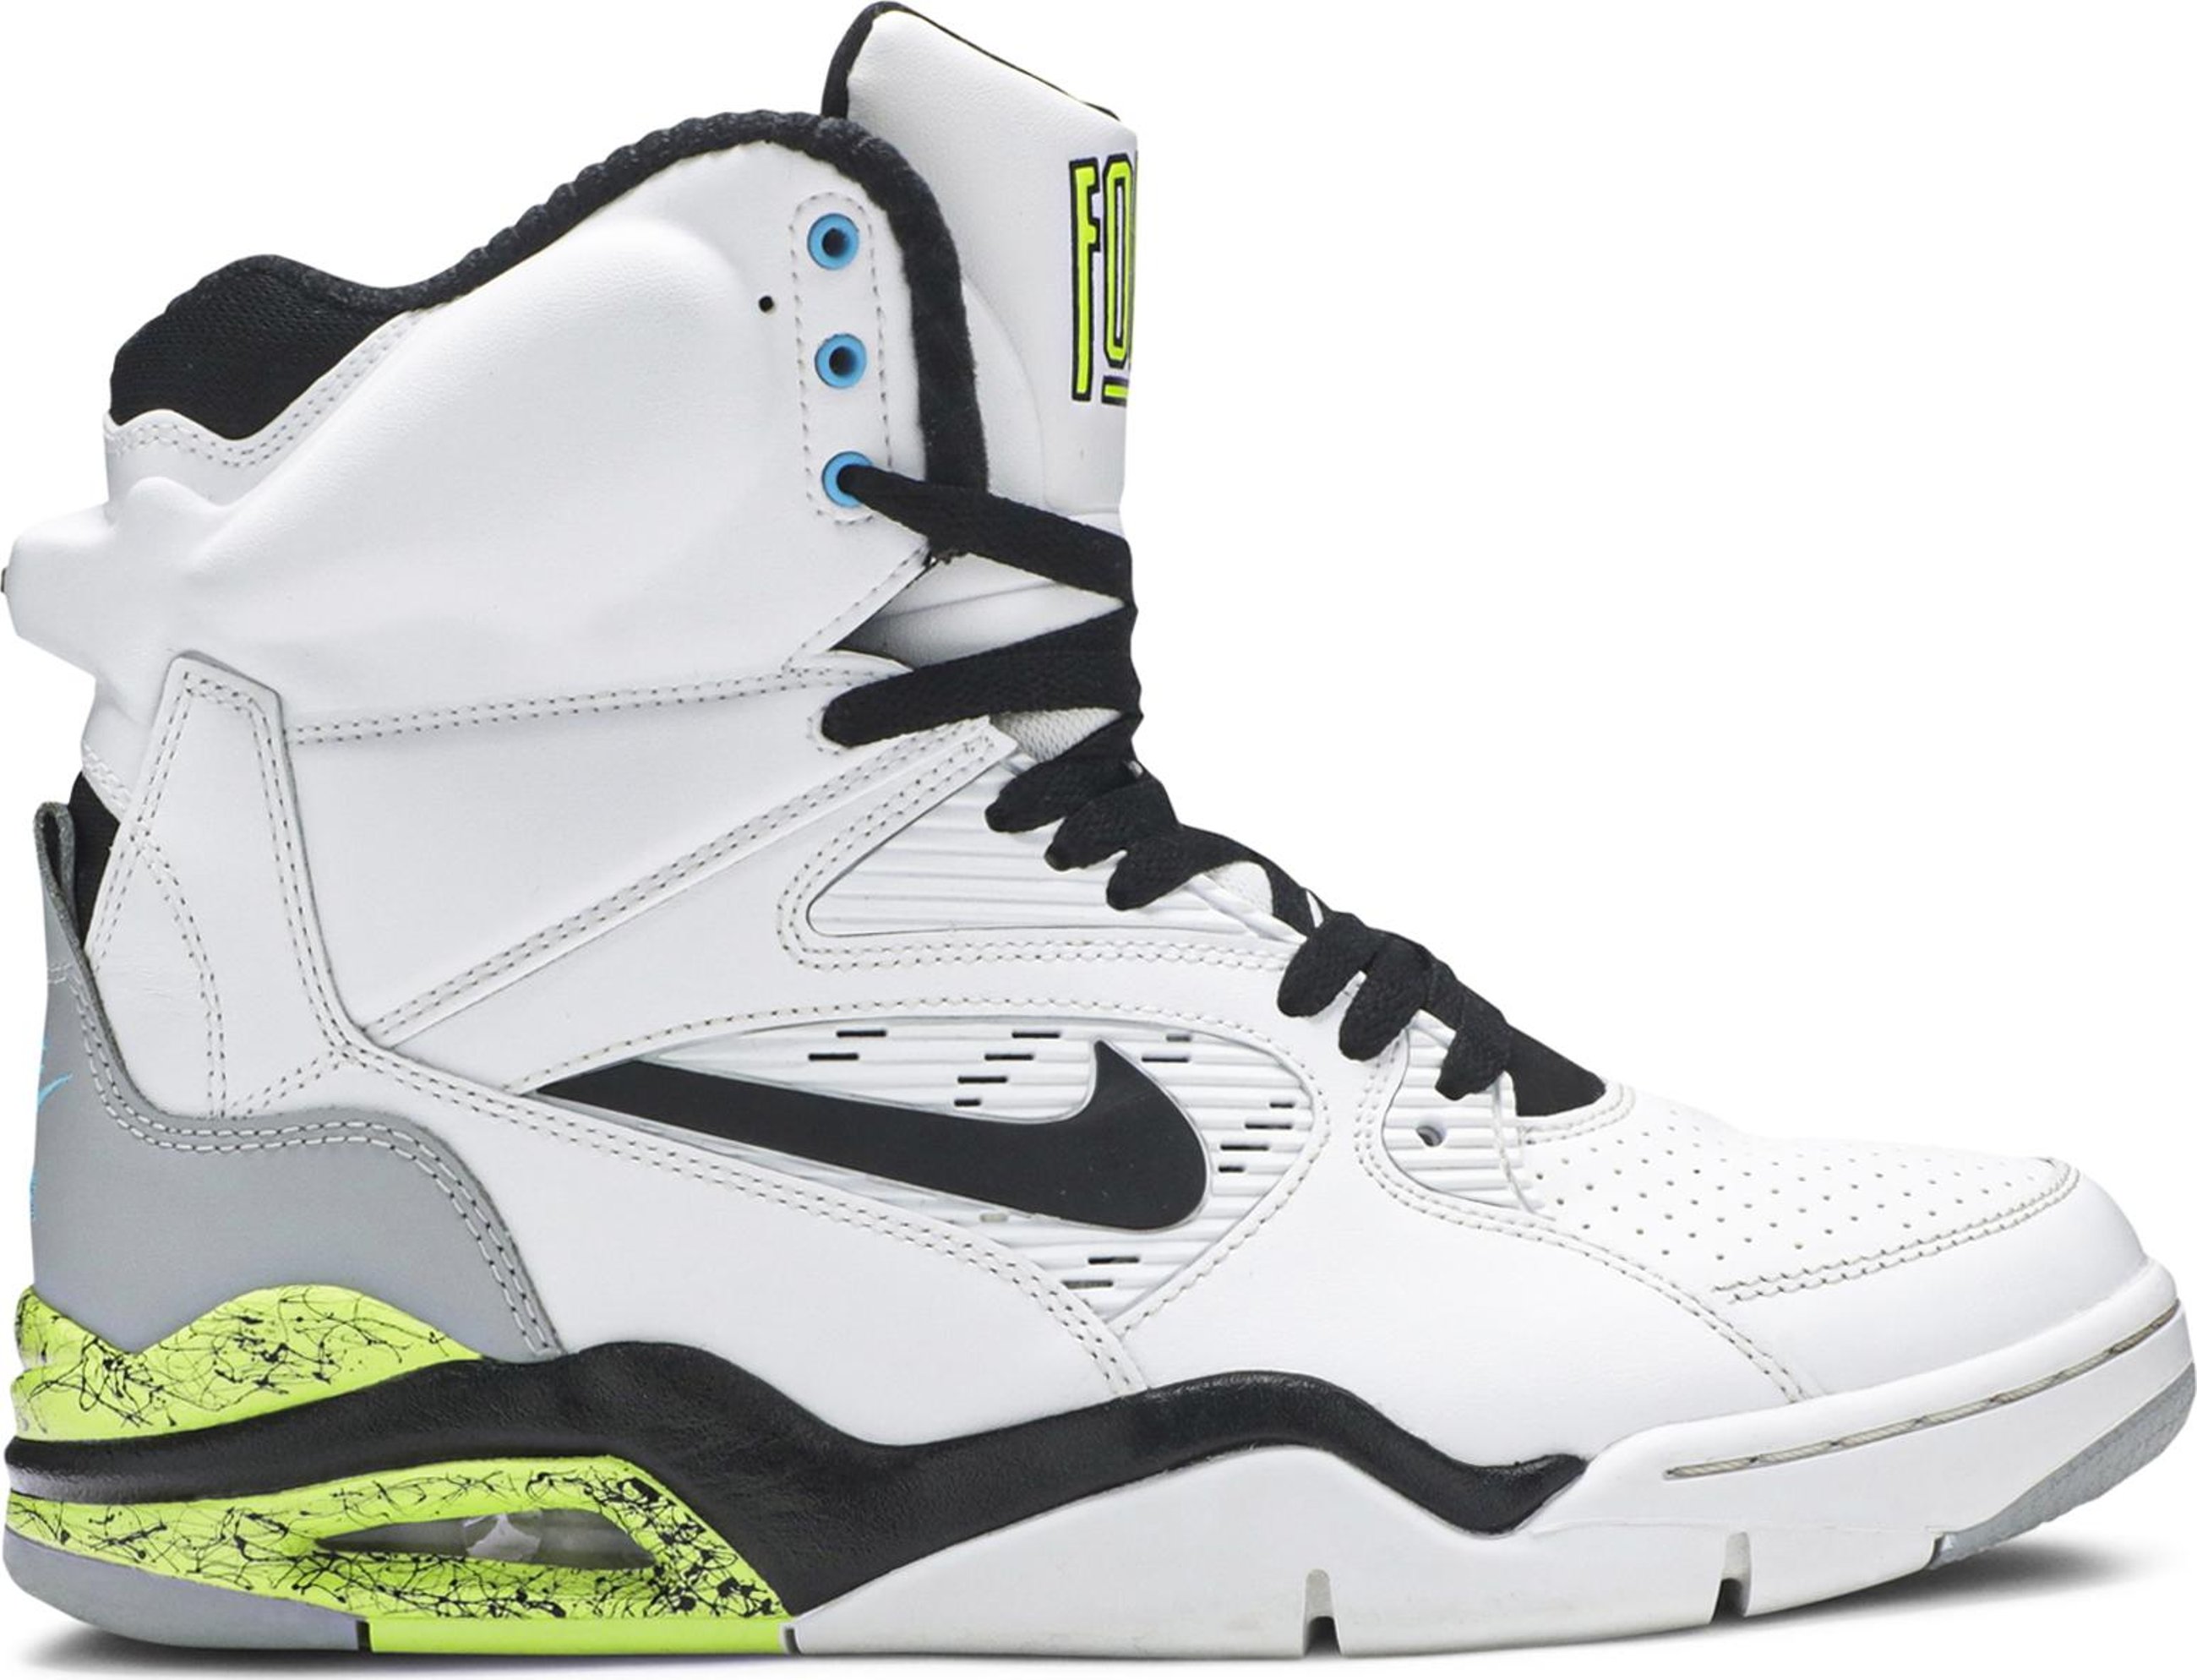 Buy Air Command Force 'Billy Hoyle' - 684715 100 | GOAT